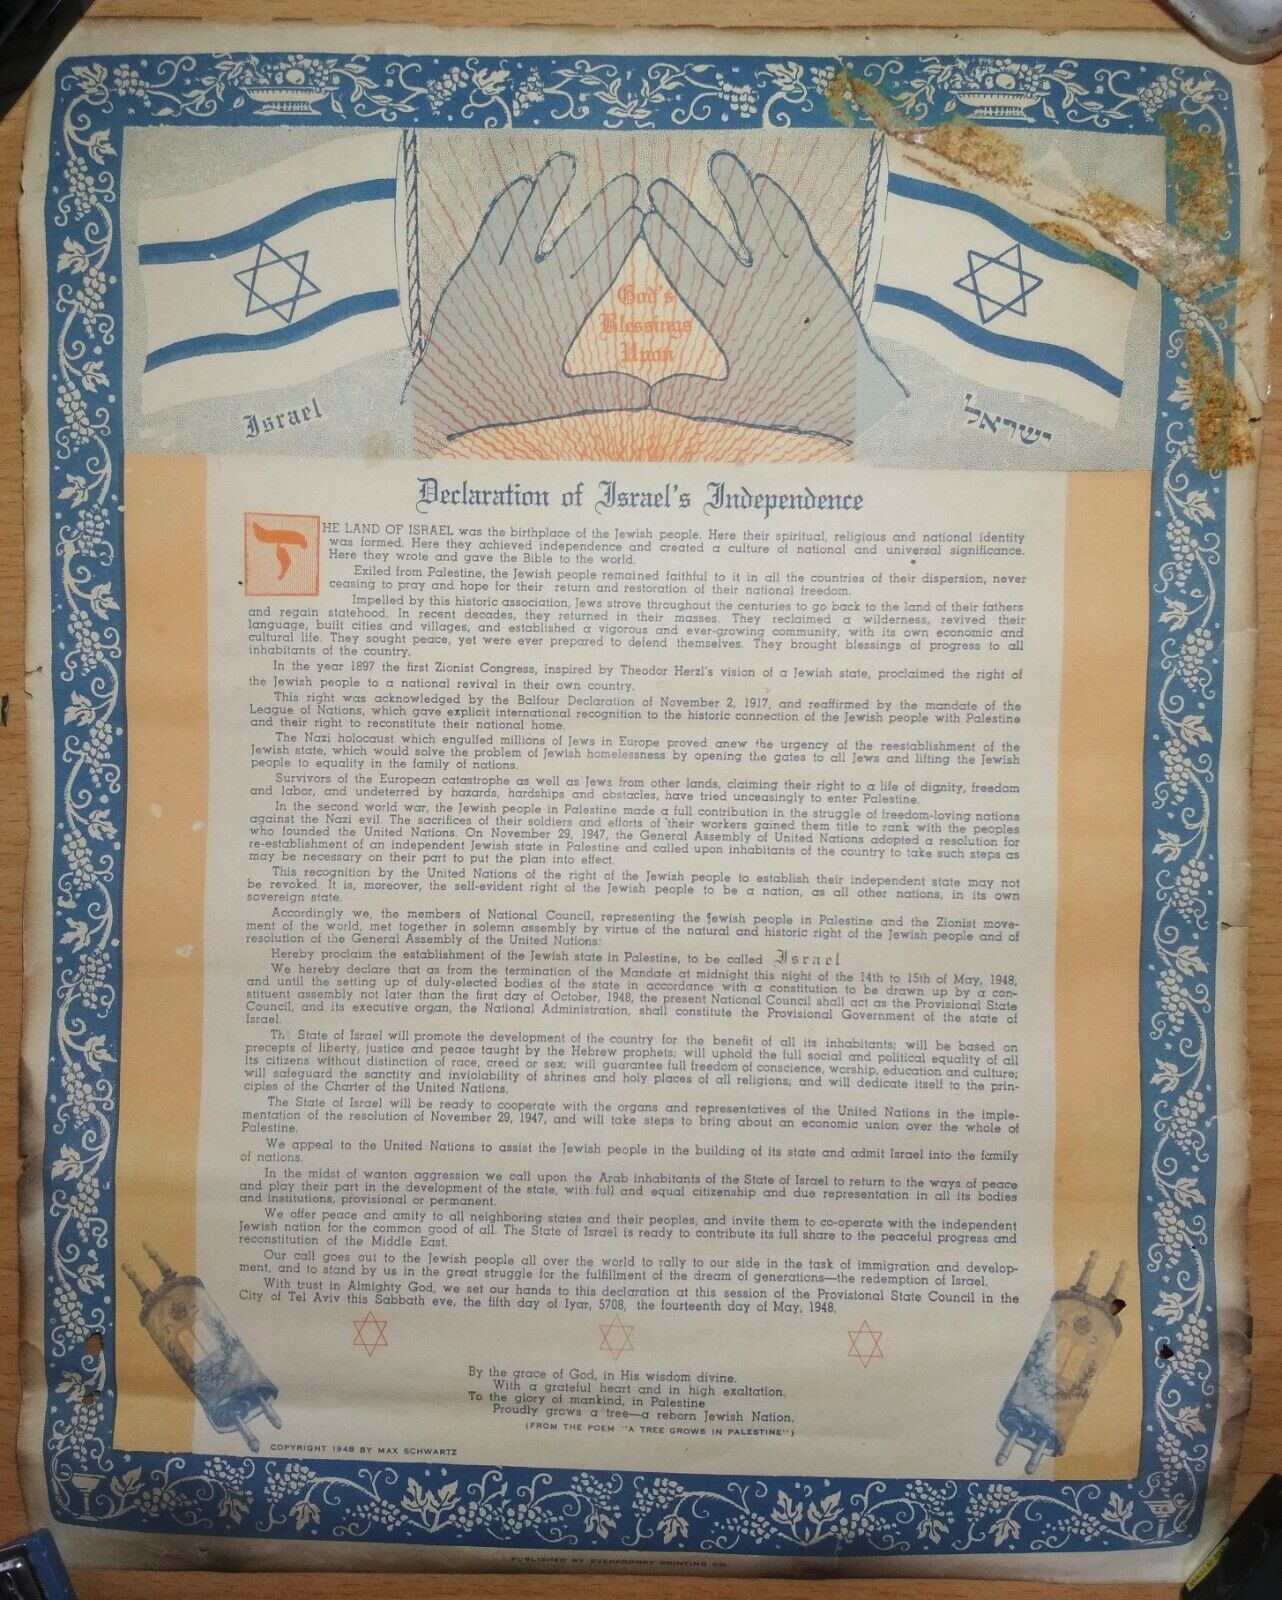 RARE 1948 DECLARATION OF ISRAEL'S INDEPENDENCE IN ENGLISH